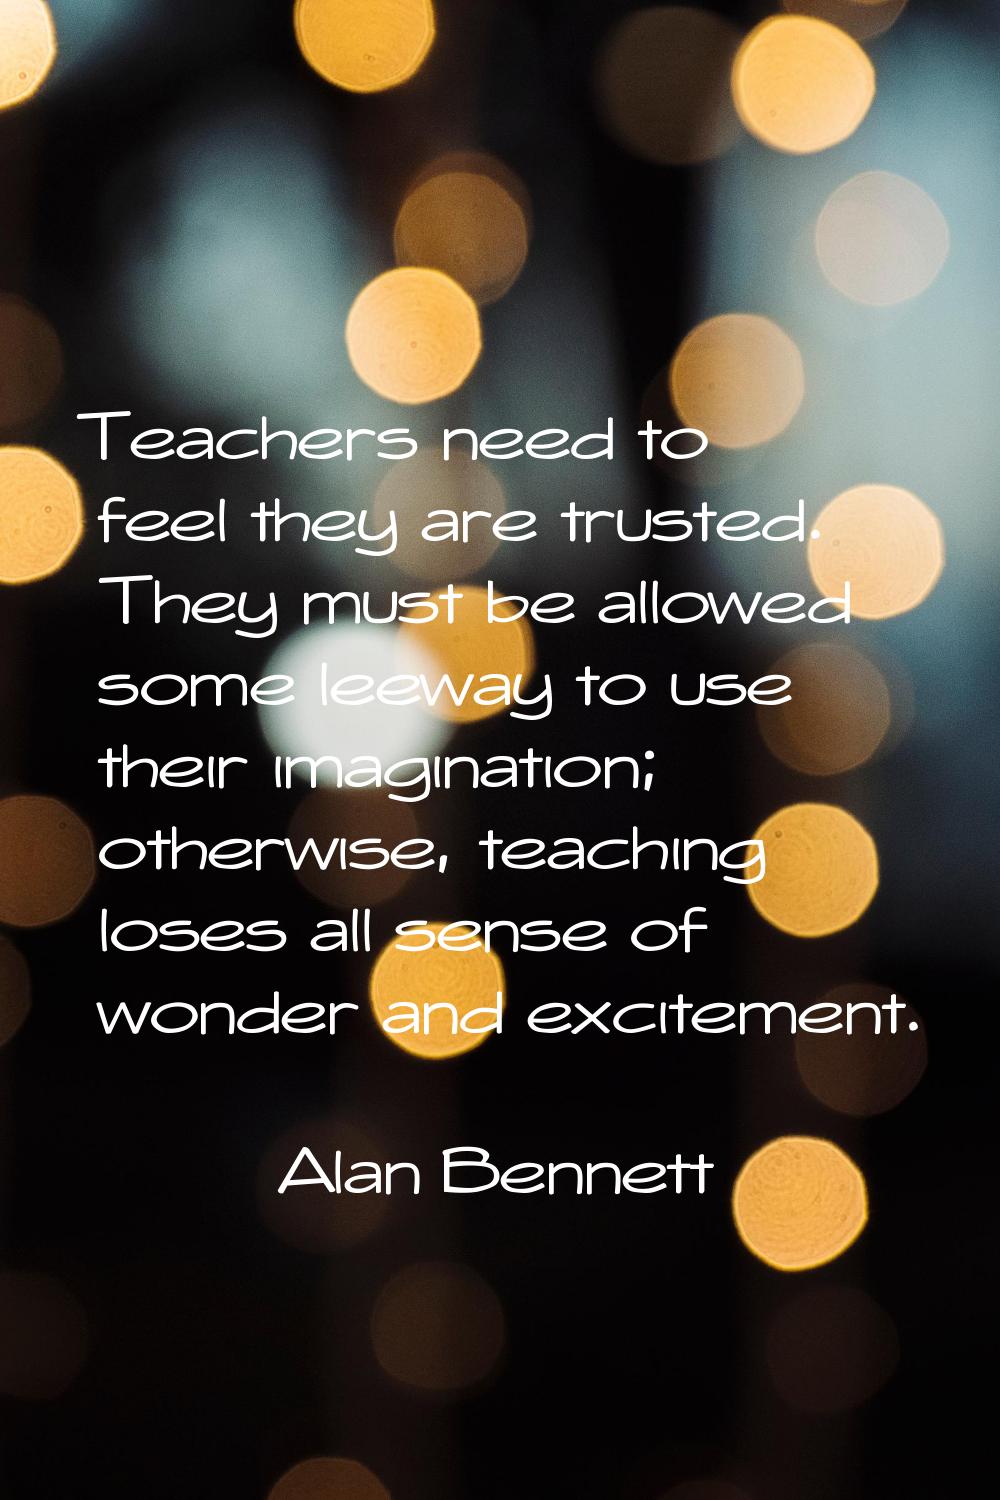 Teachers need to feel they are trusted. They must be allowed some leeway to use their imagination; 